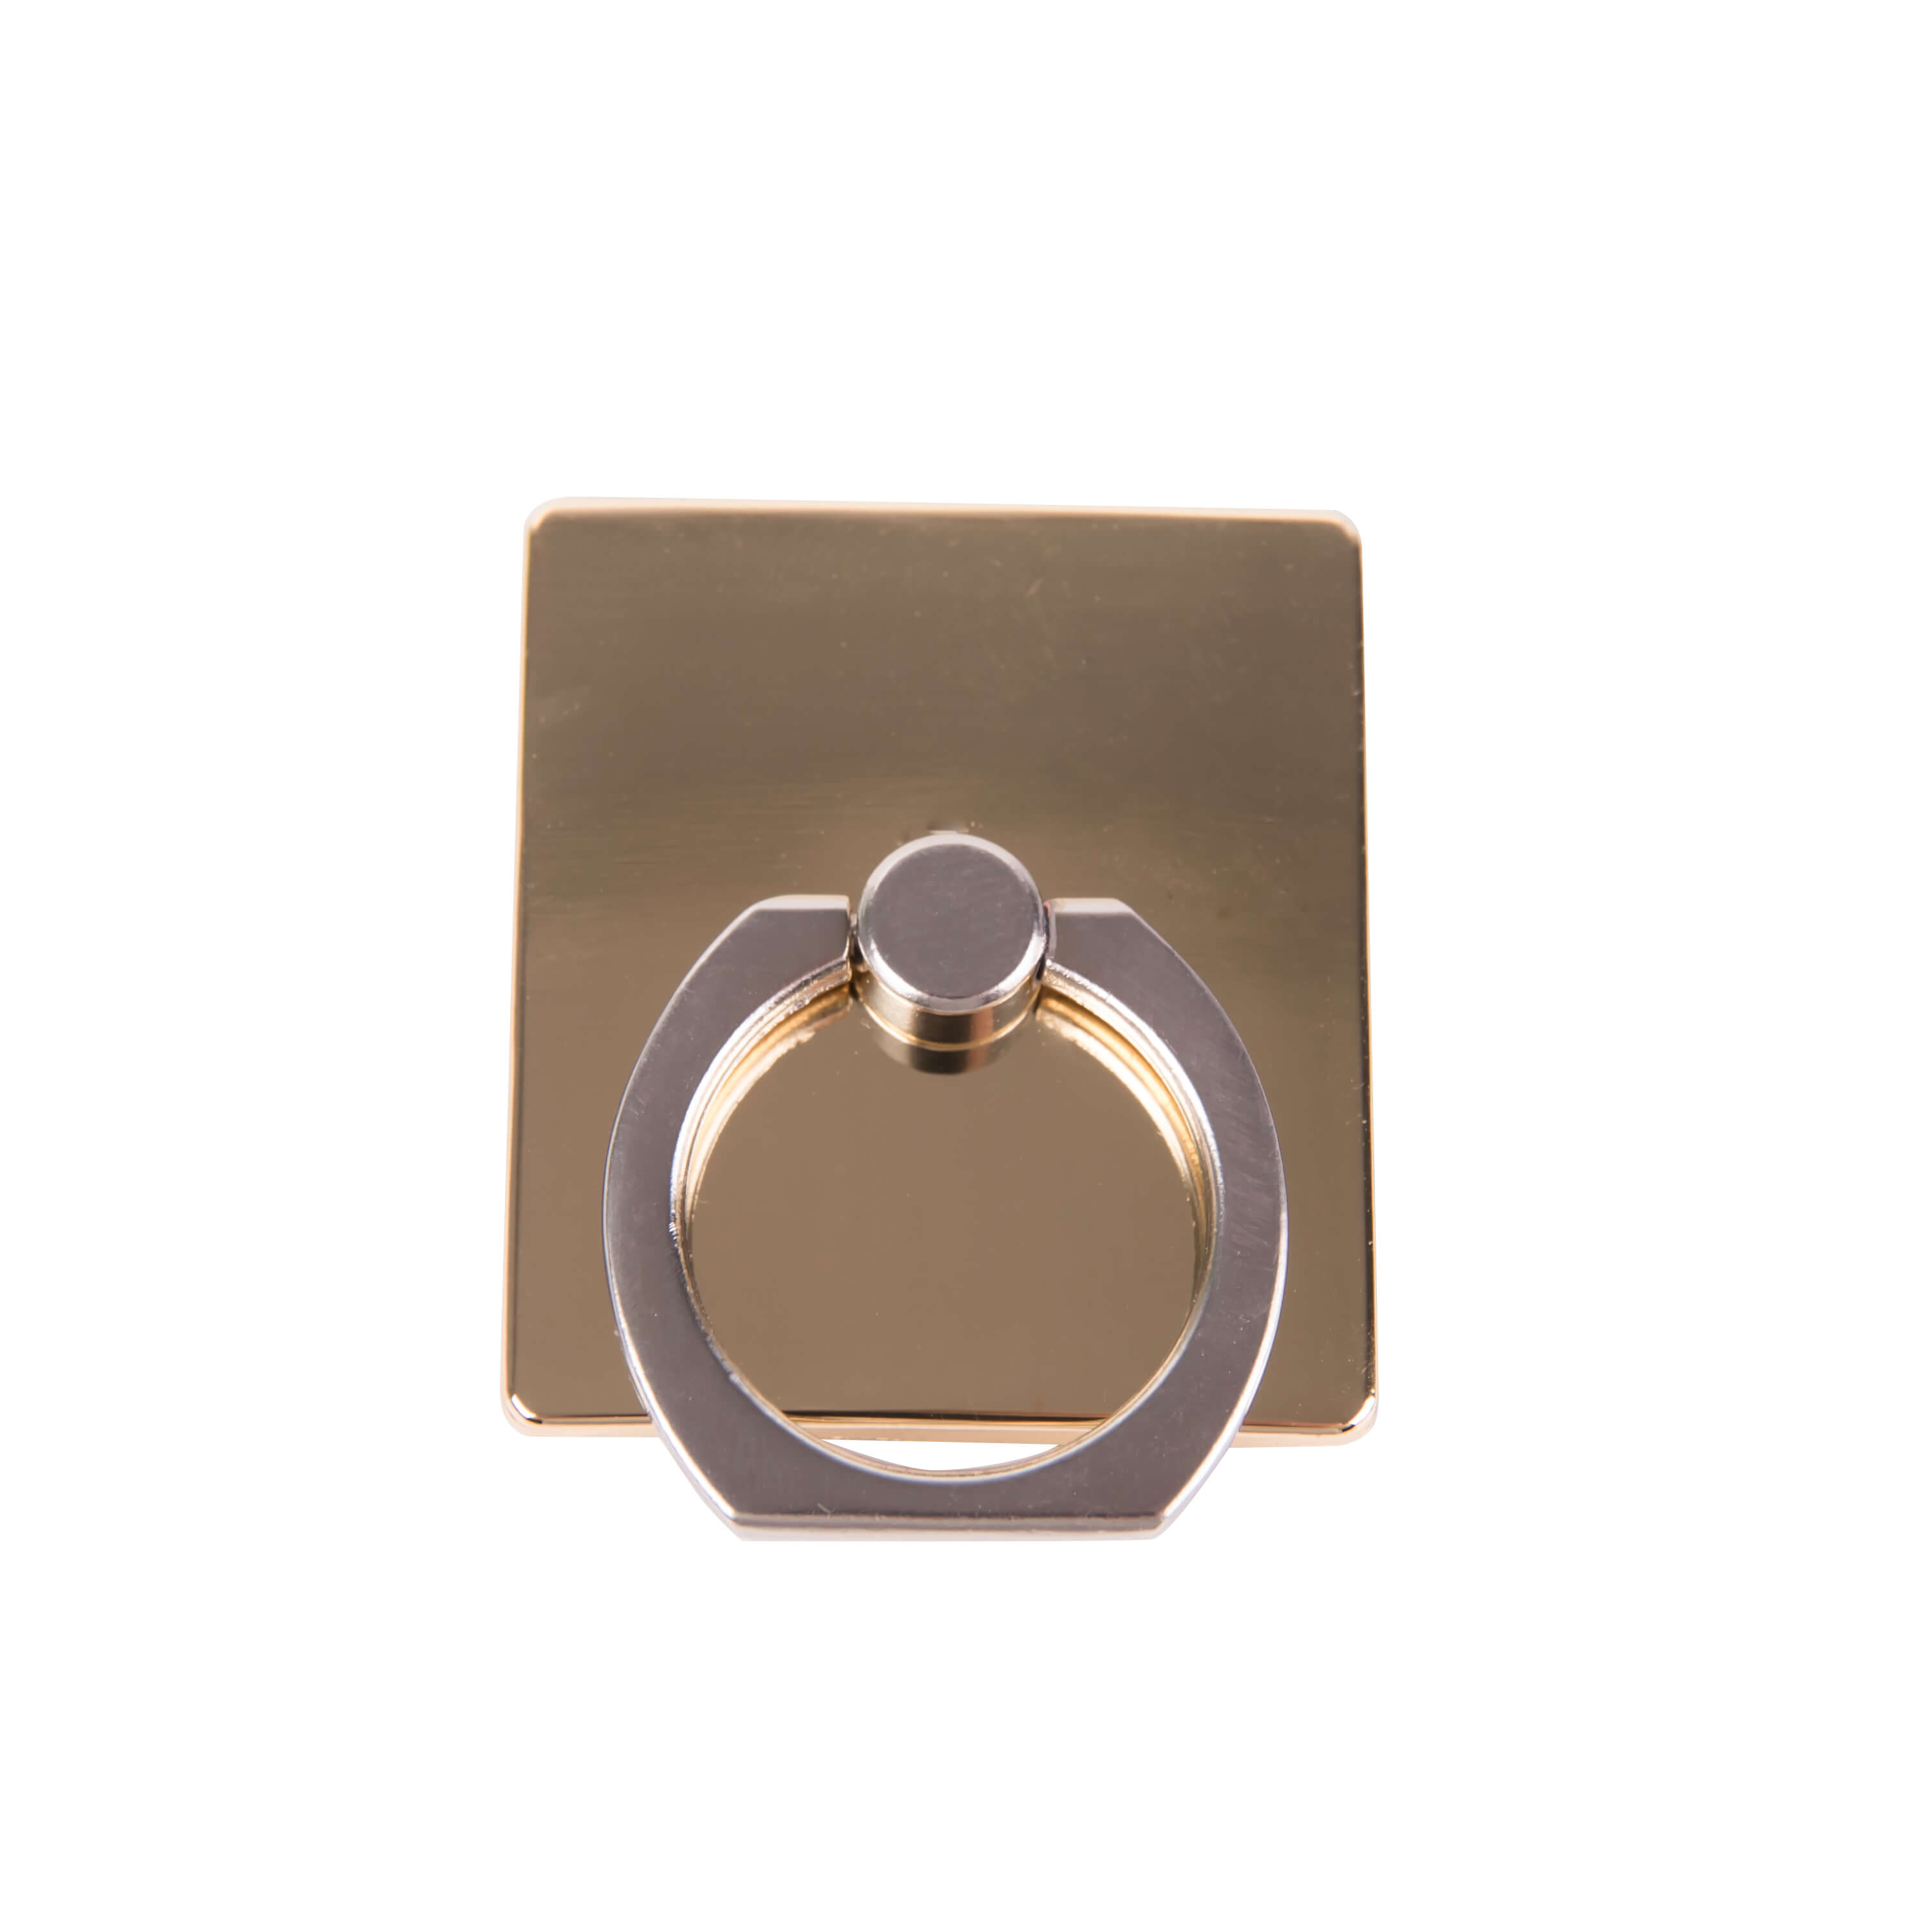 Finger ring gold square stand function